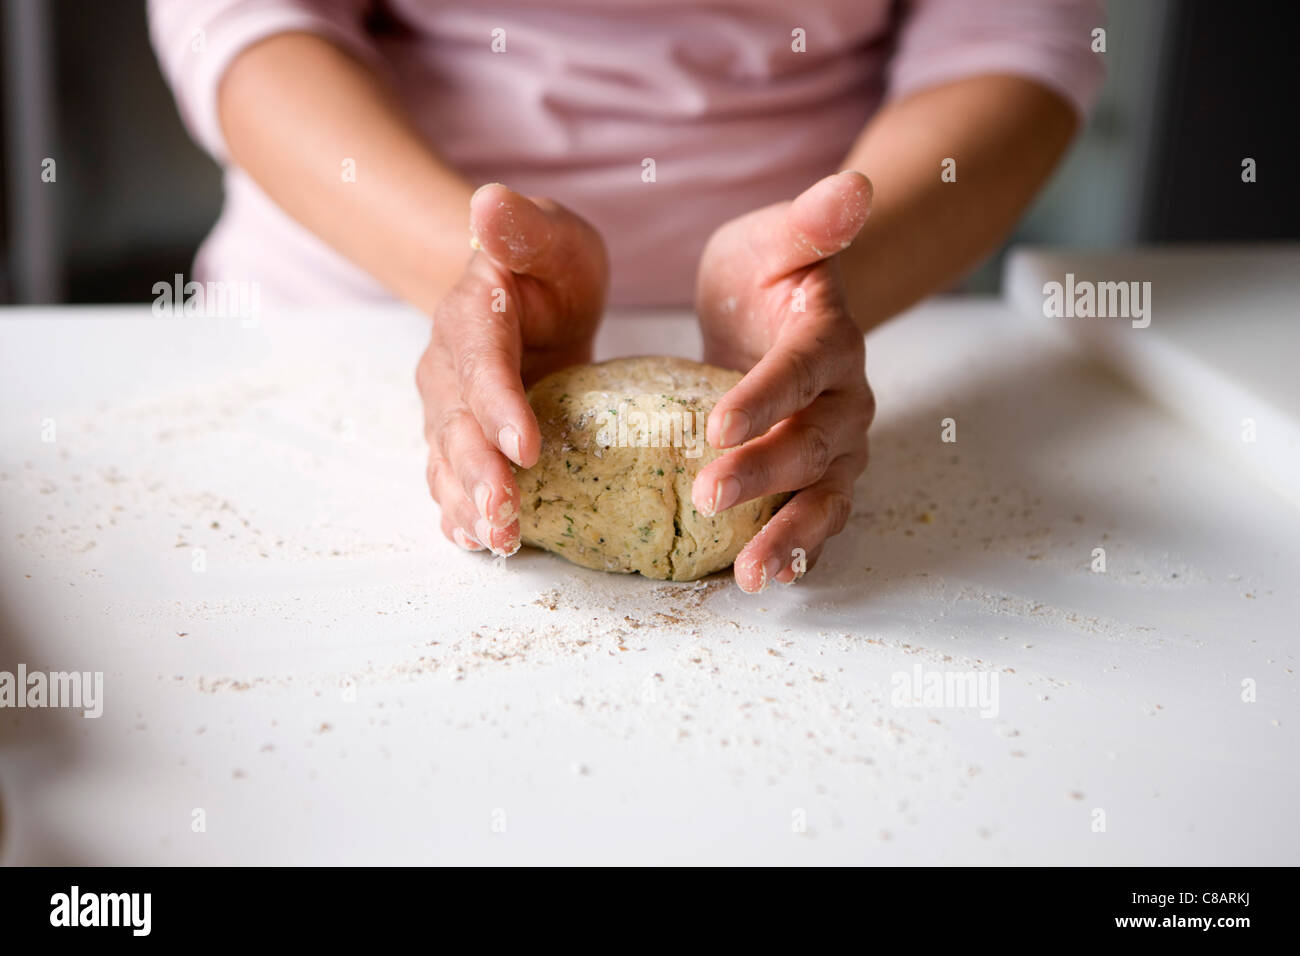 Shaping the soya bean mixture into a ball with your hands Stock Photo